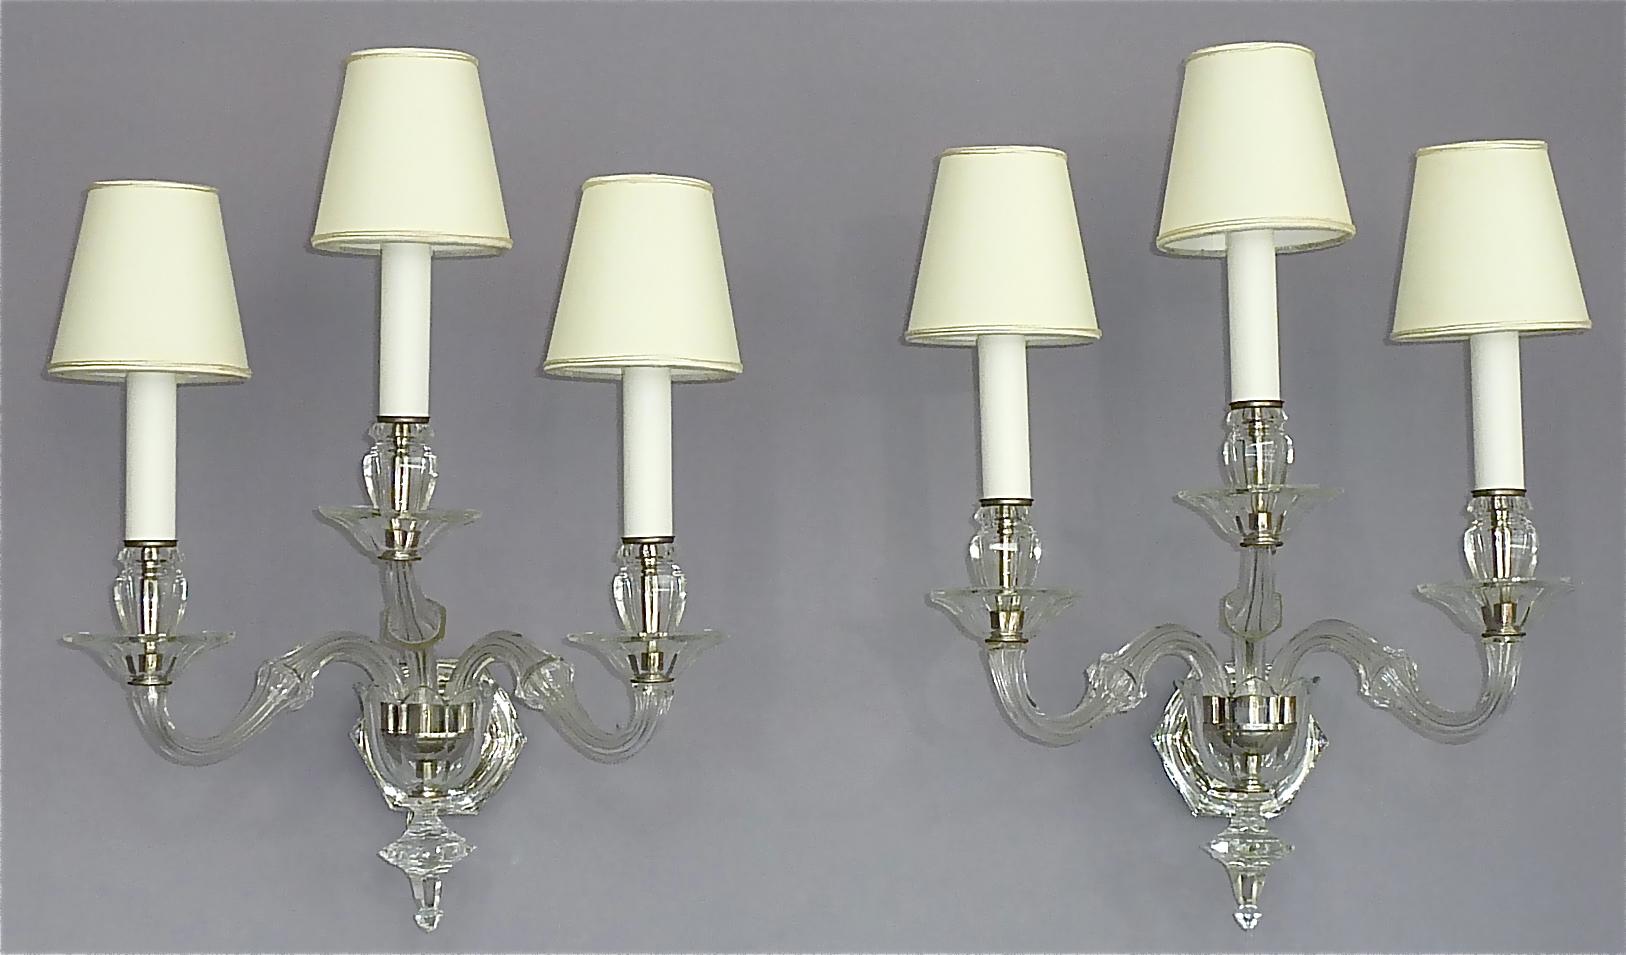 Large precious pair of classical Art Deco scrolled 3-arm hand-cut faceted crystal glass sconces or wall lamps with off white lampshades in the style of Baccarat, France or Germany, circa 1920-1930. The beautiful handcrafted crystal glass wall lights